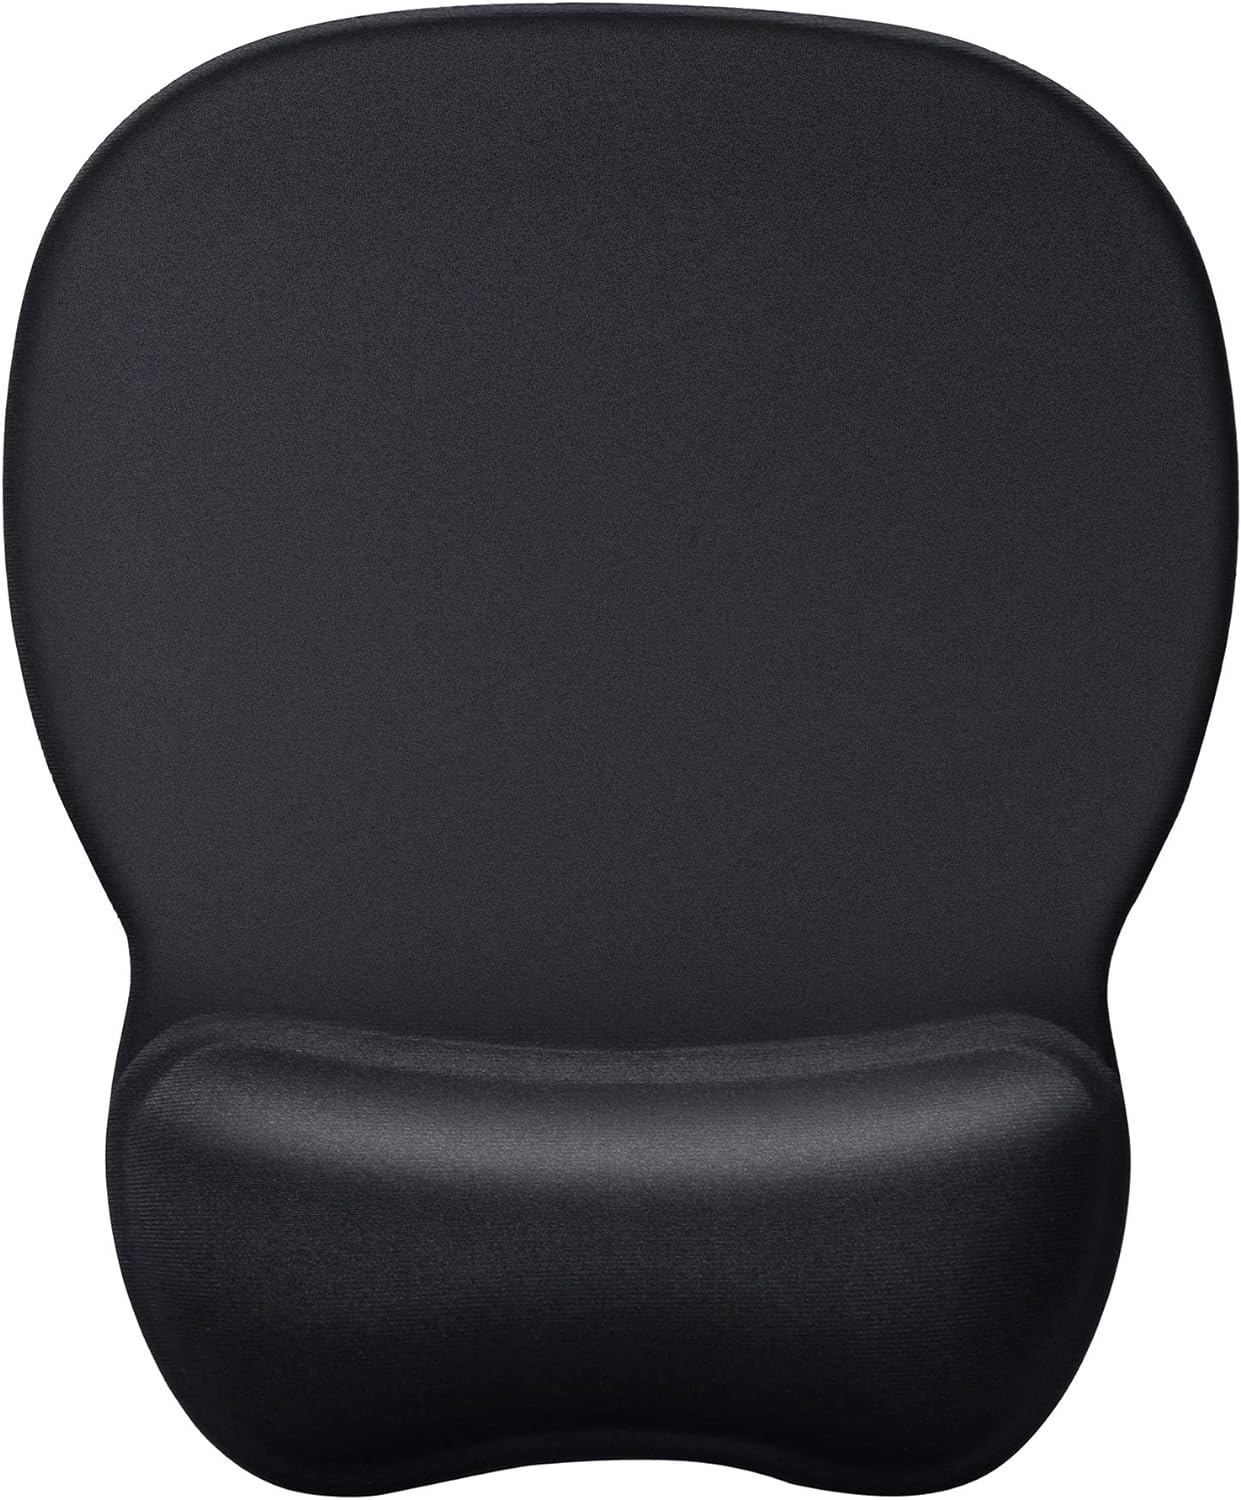 MROCO Ergonomic Mouse Pad with Gel Wrist Support